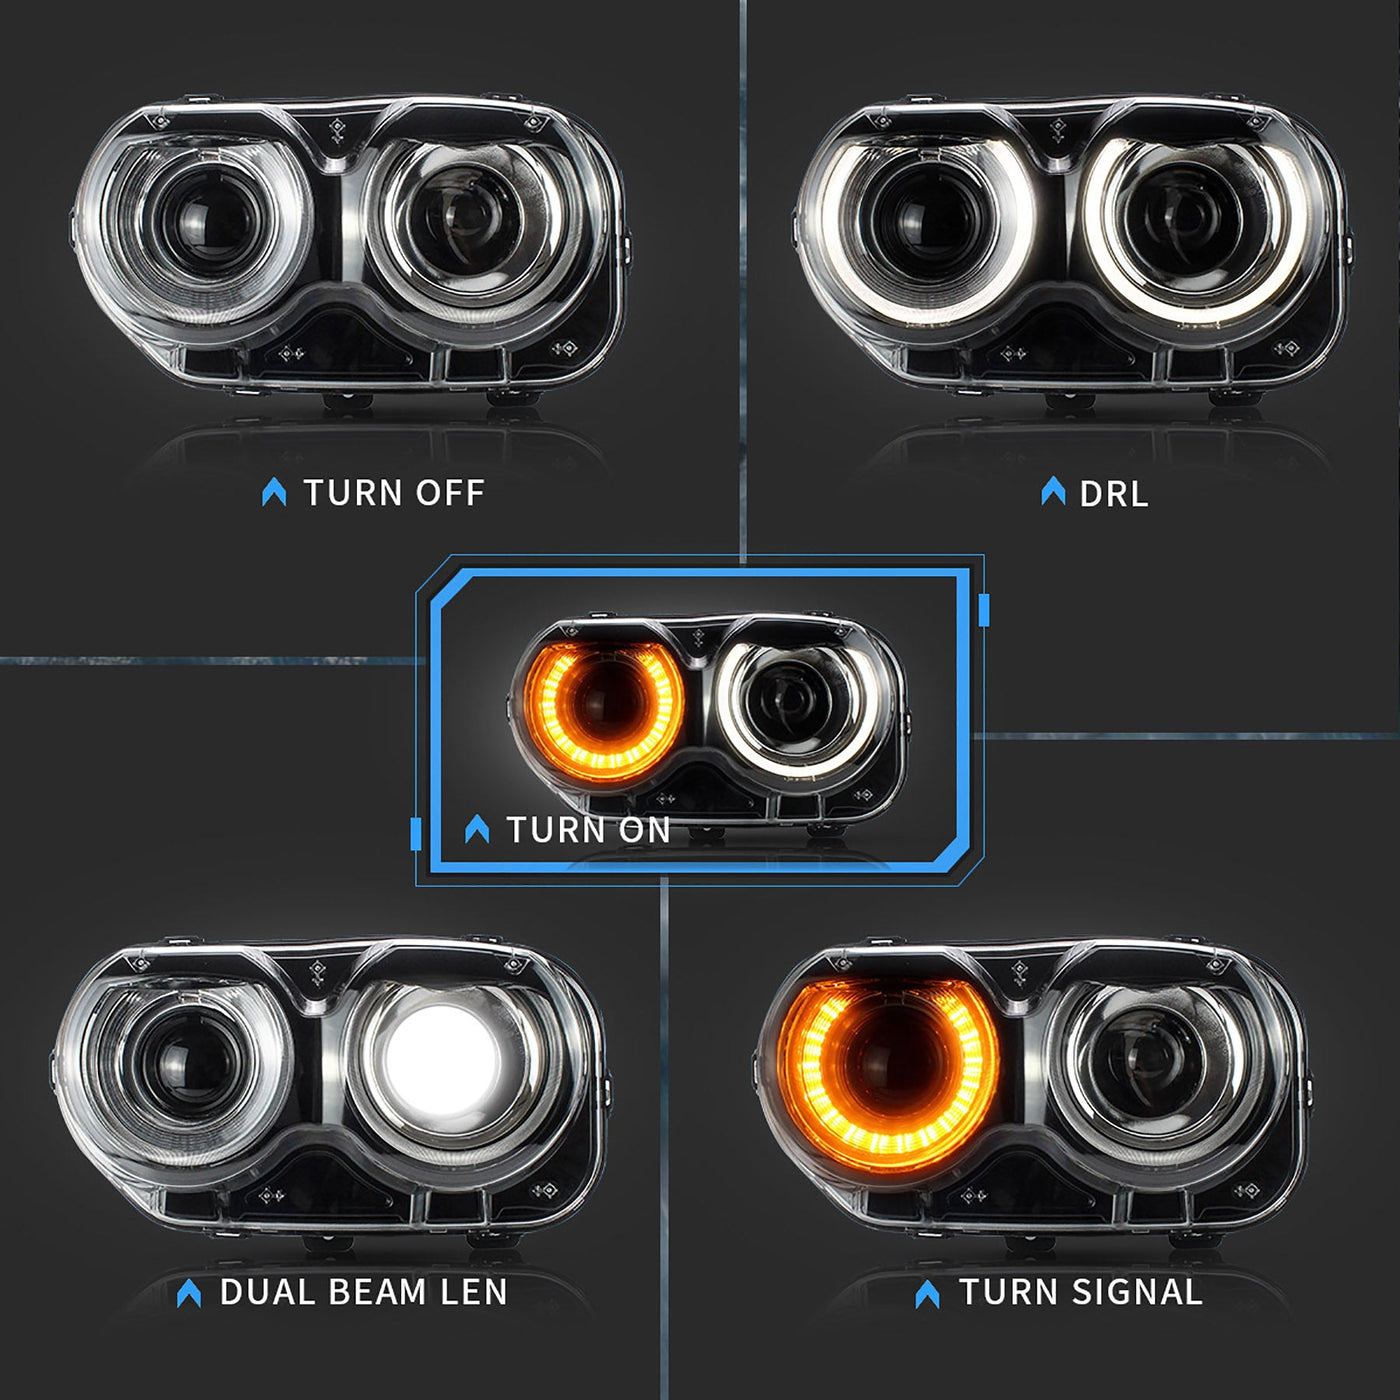 VLAND LED Halo Headlights For Dodge Challenger 2015-2020 With Sequential Turn Signals